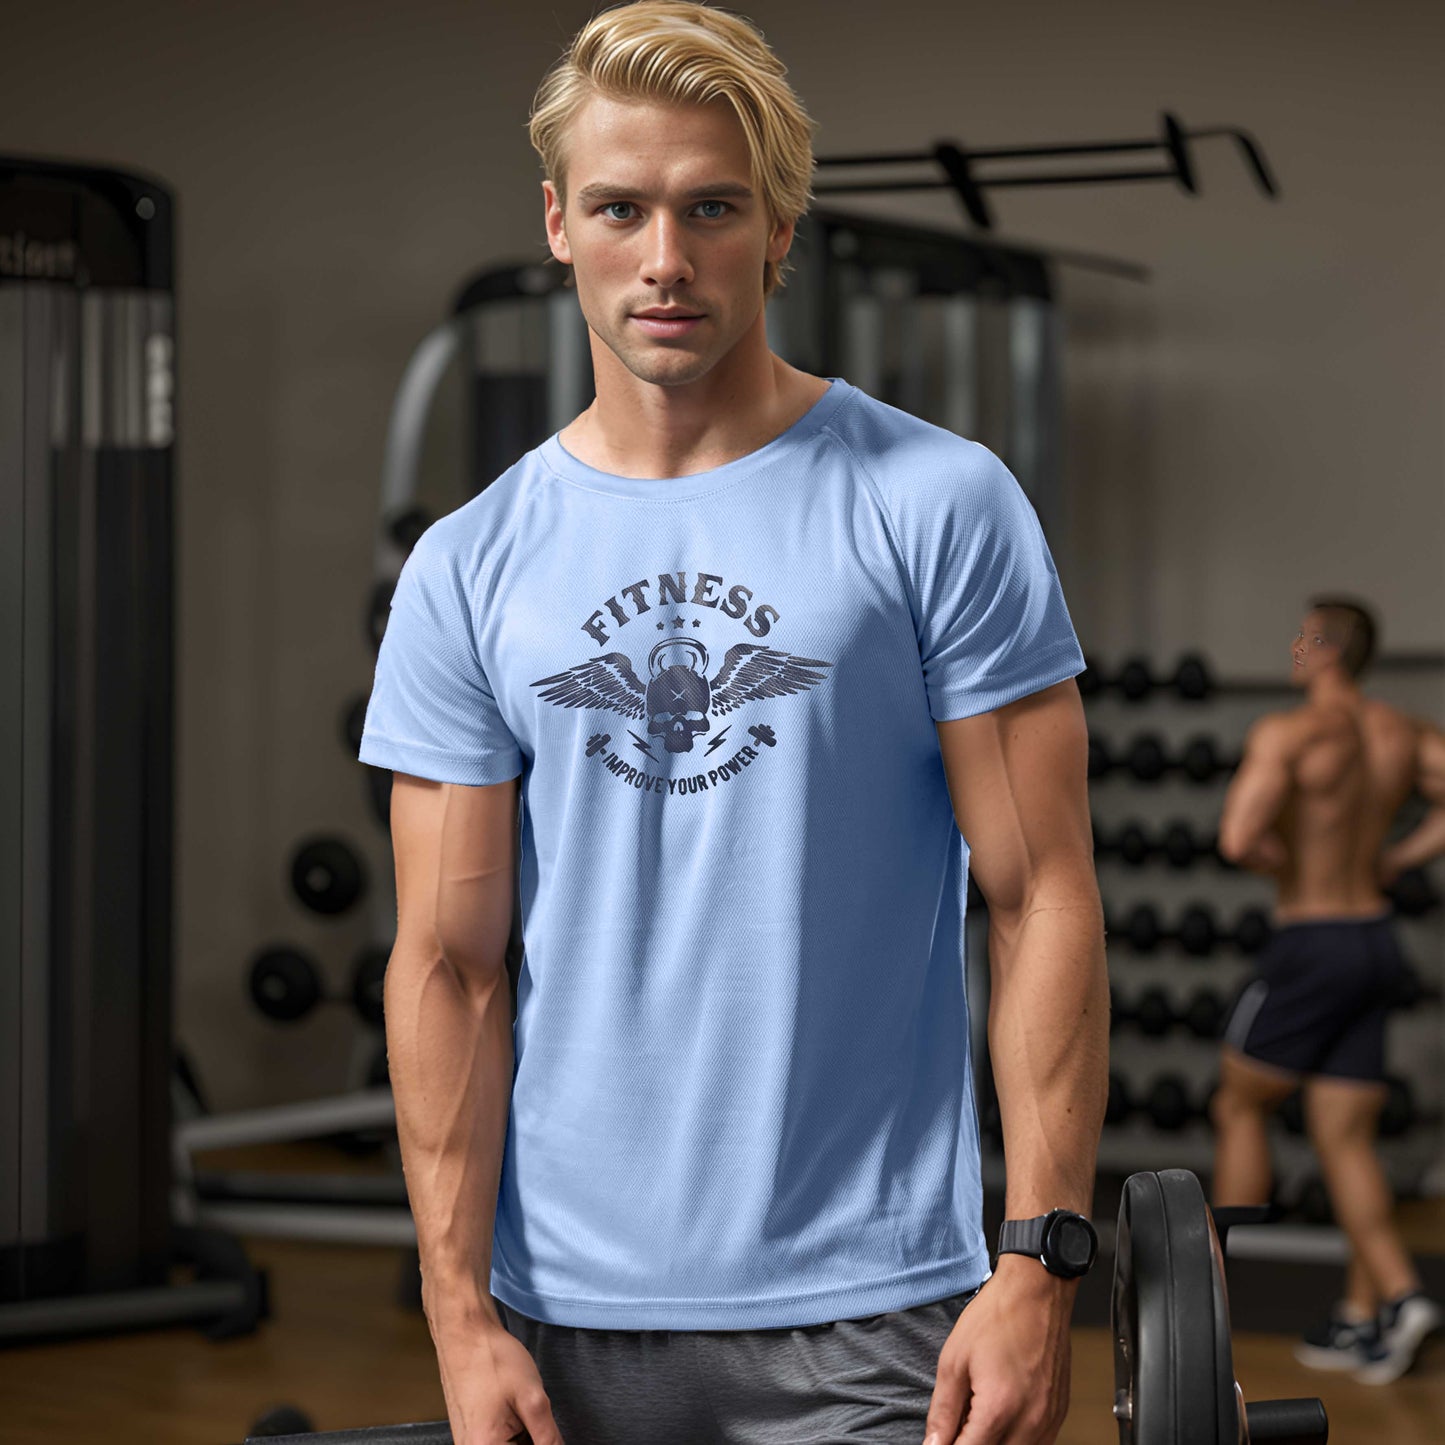 Polo Republica Men's Fitness Power Printed Activewear Tee Shirt